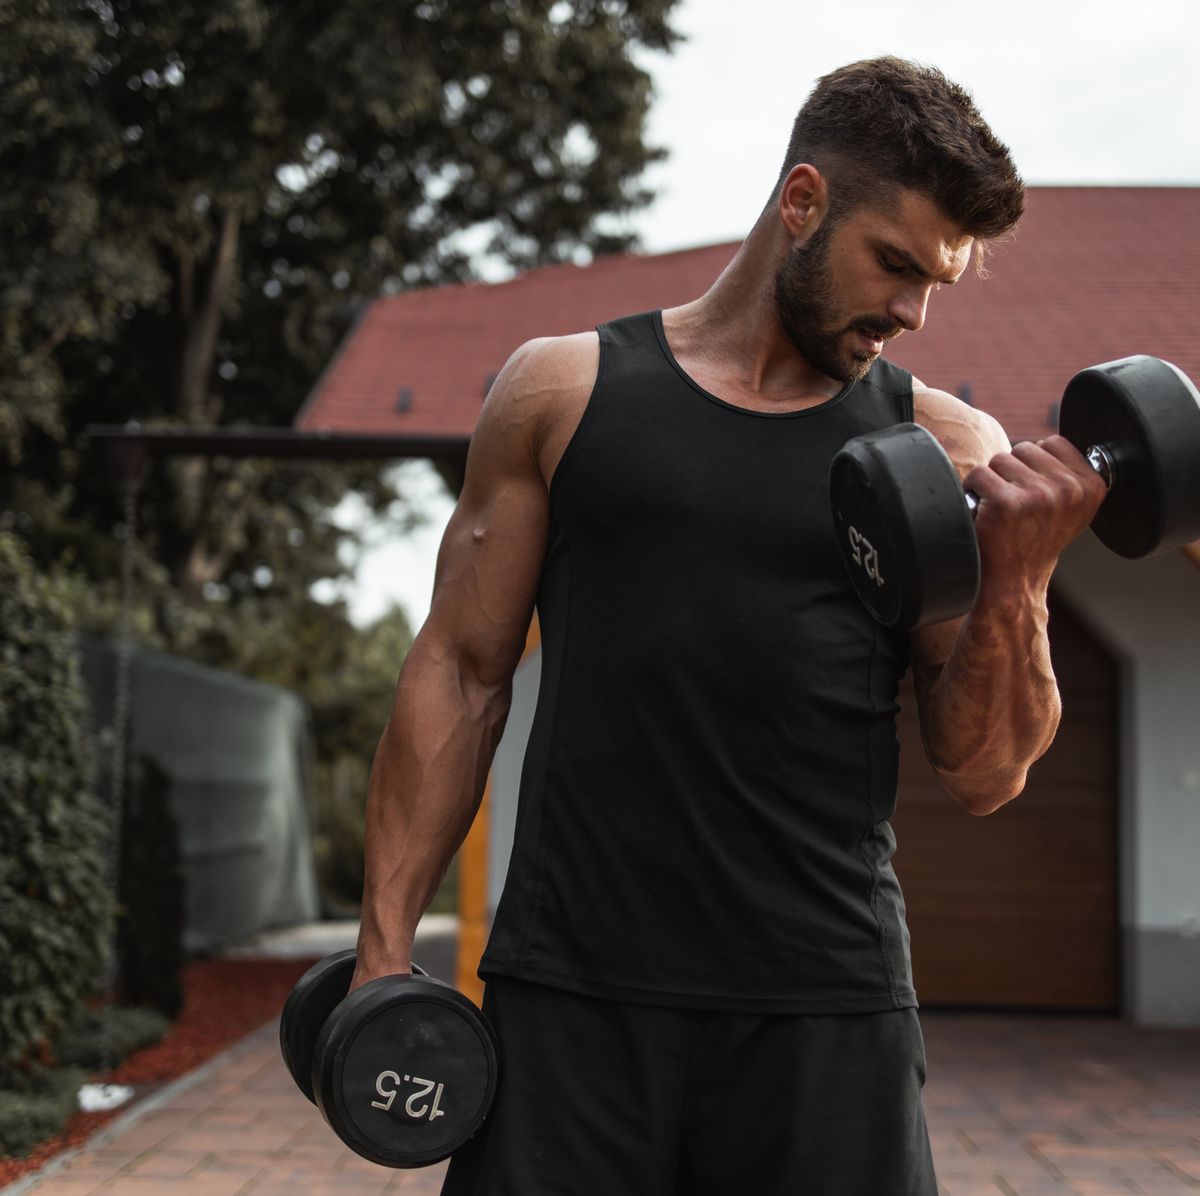 The Party Pump: An Arm Workout for the Festive Season